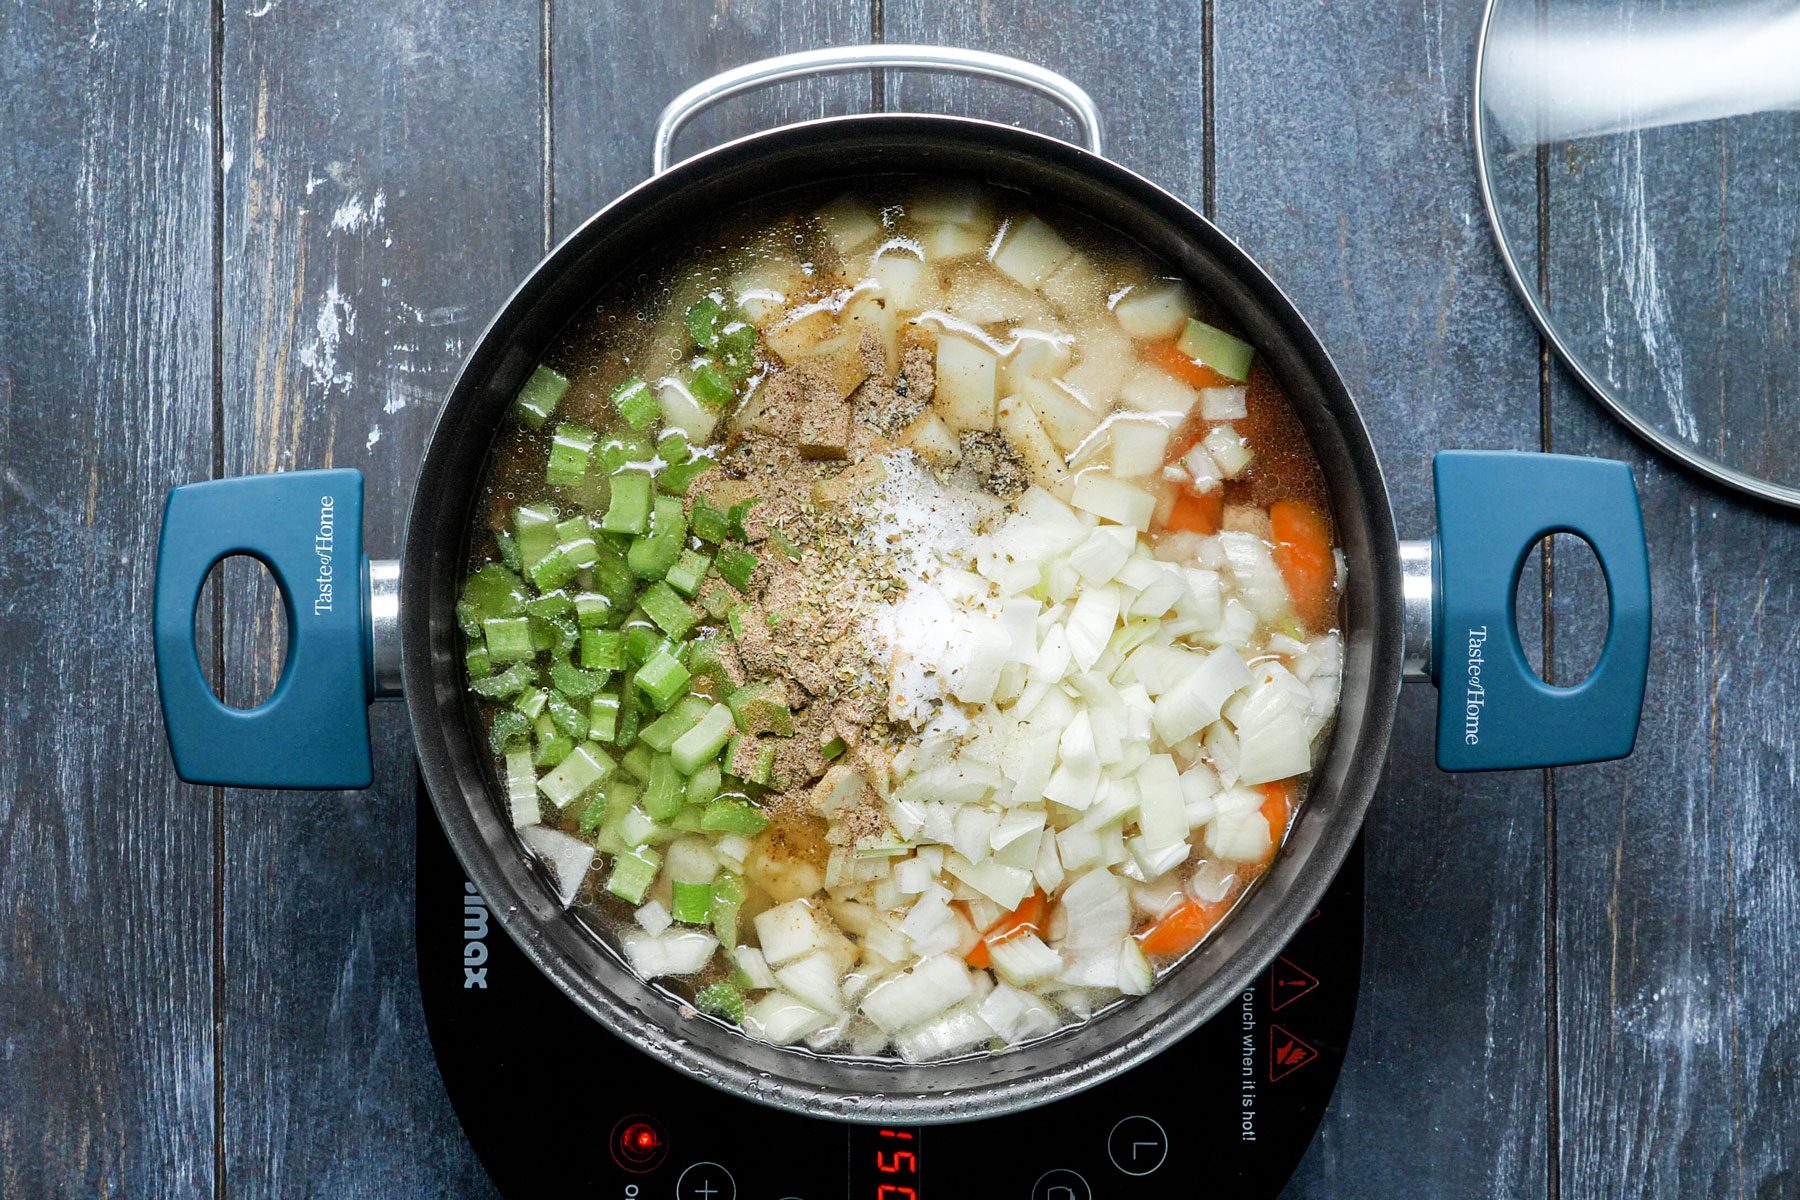 Mixing water, carrots, potatoes, onion, celery, beef bouillon granules in a large saucepan 